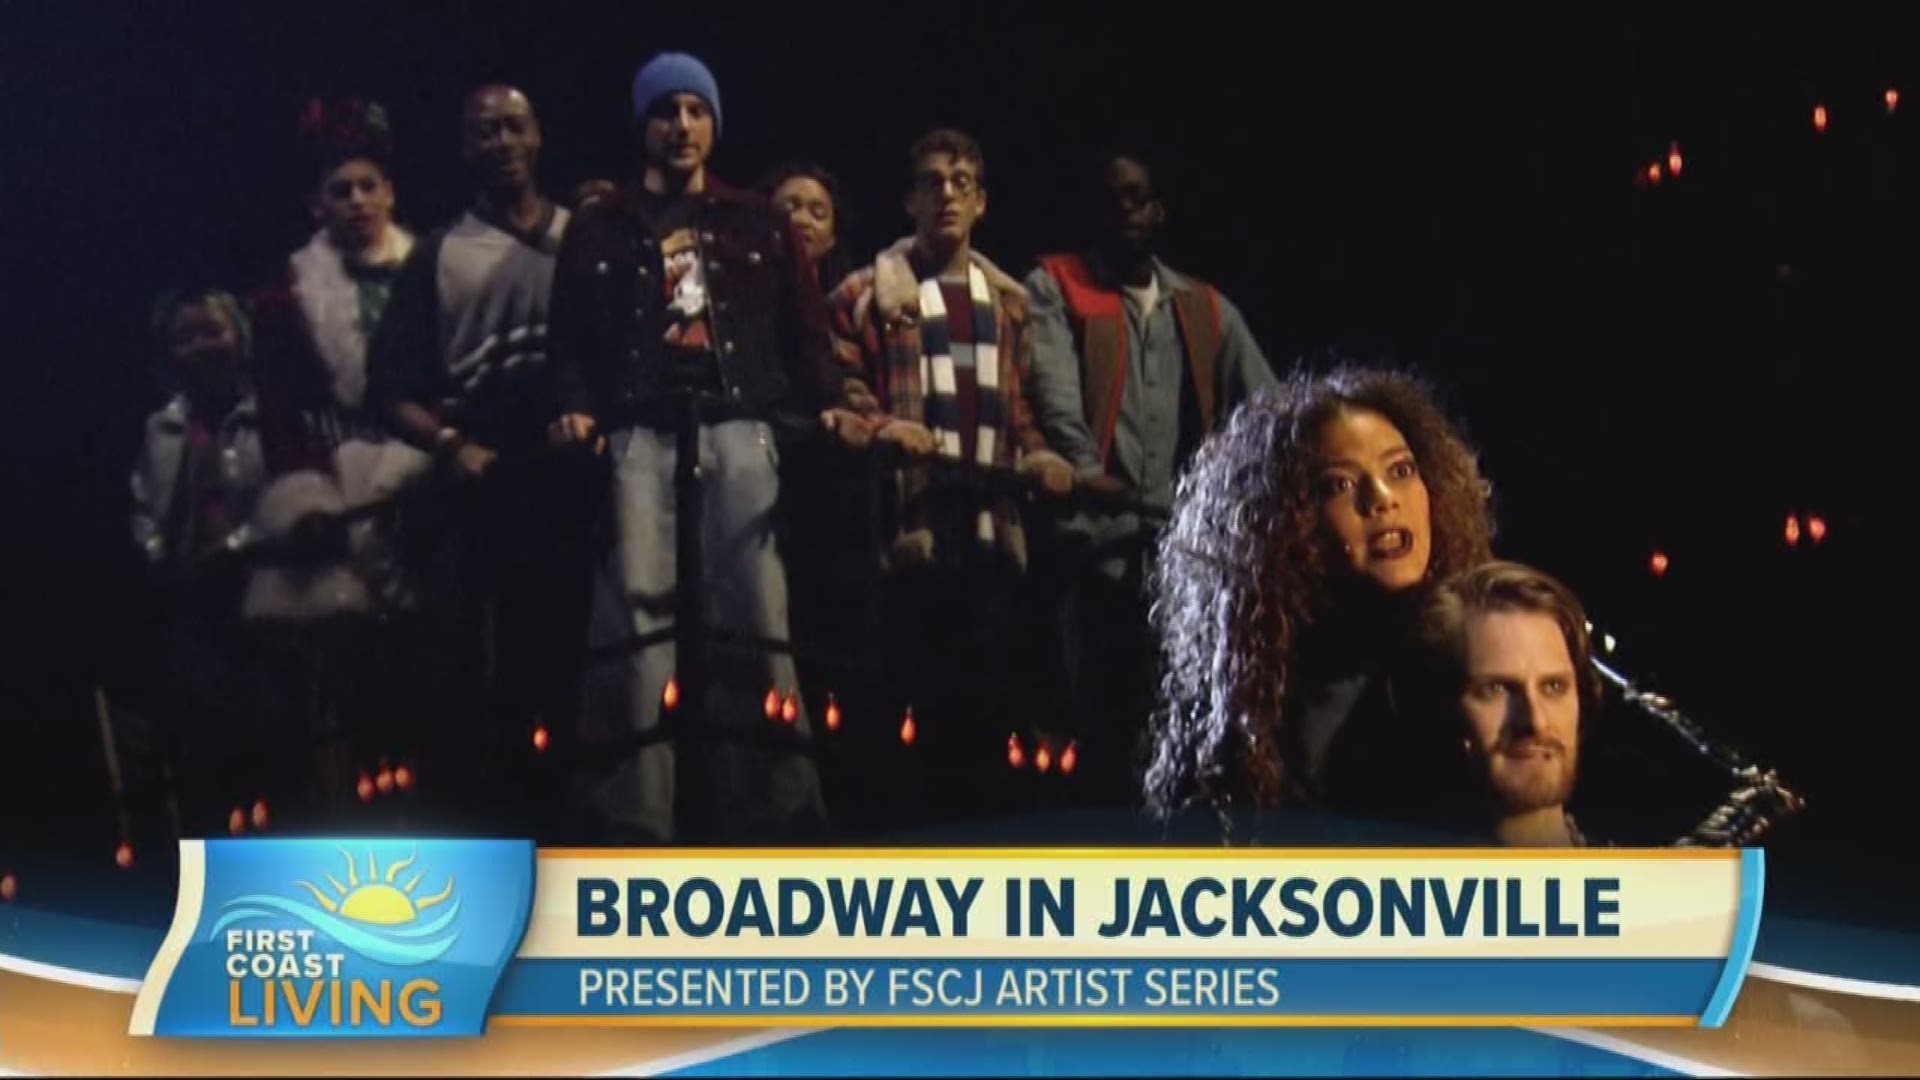 FSCJ Artist series is presenting an extensive line of high quality Broadway shows and performances for everyone to enjoy.